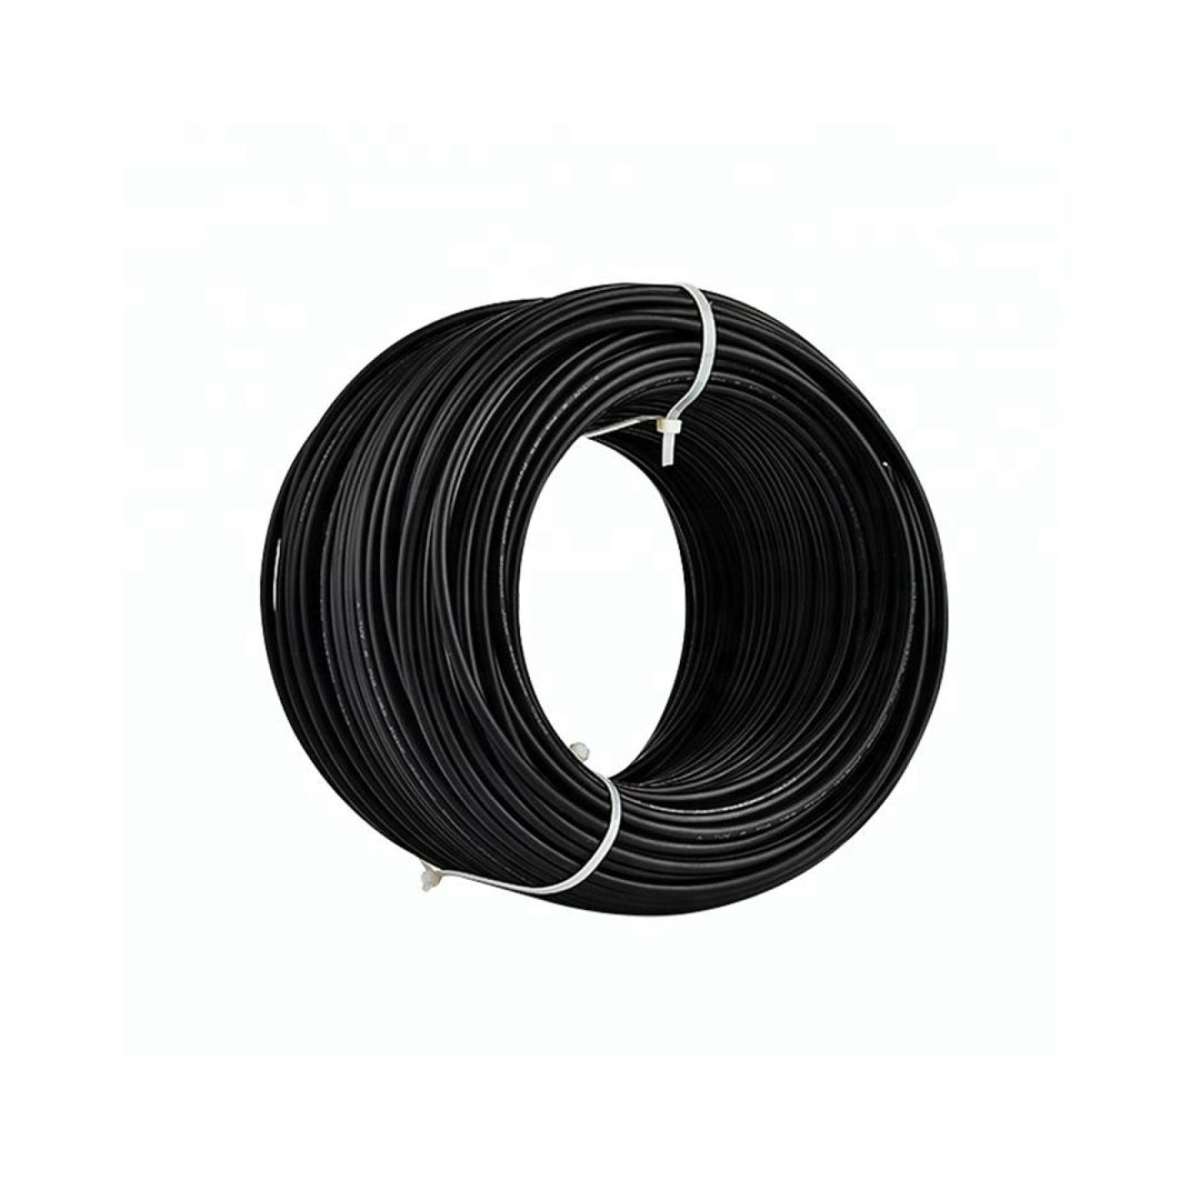 TommaTech 10.0 mm² Solar Cable PVI1-F Black 1 Meter